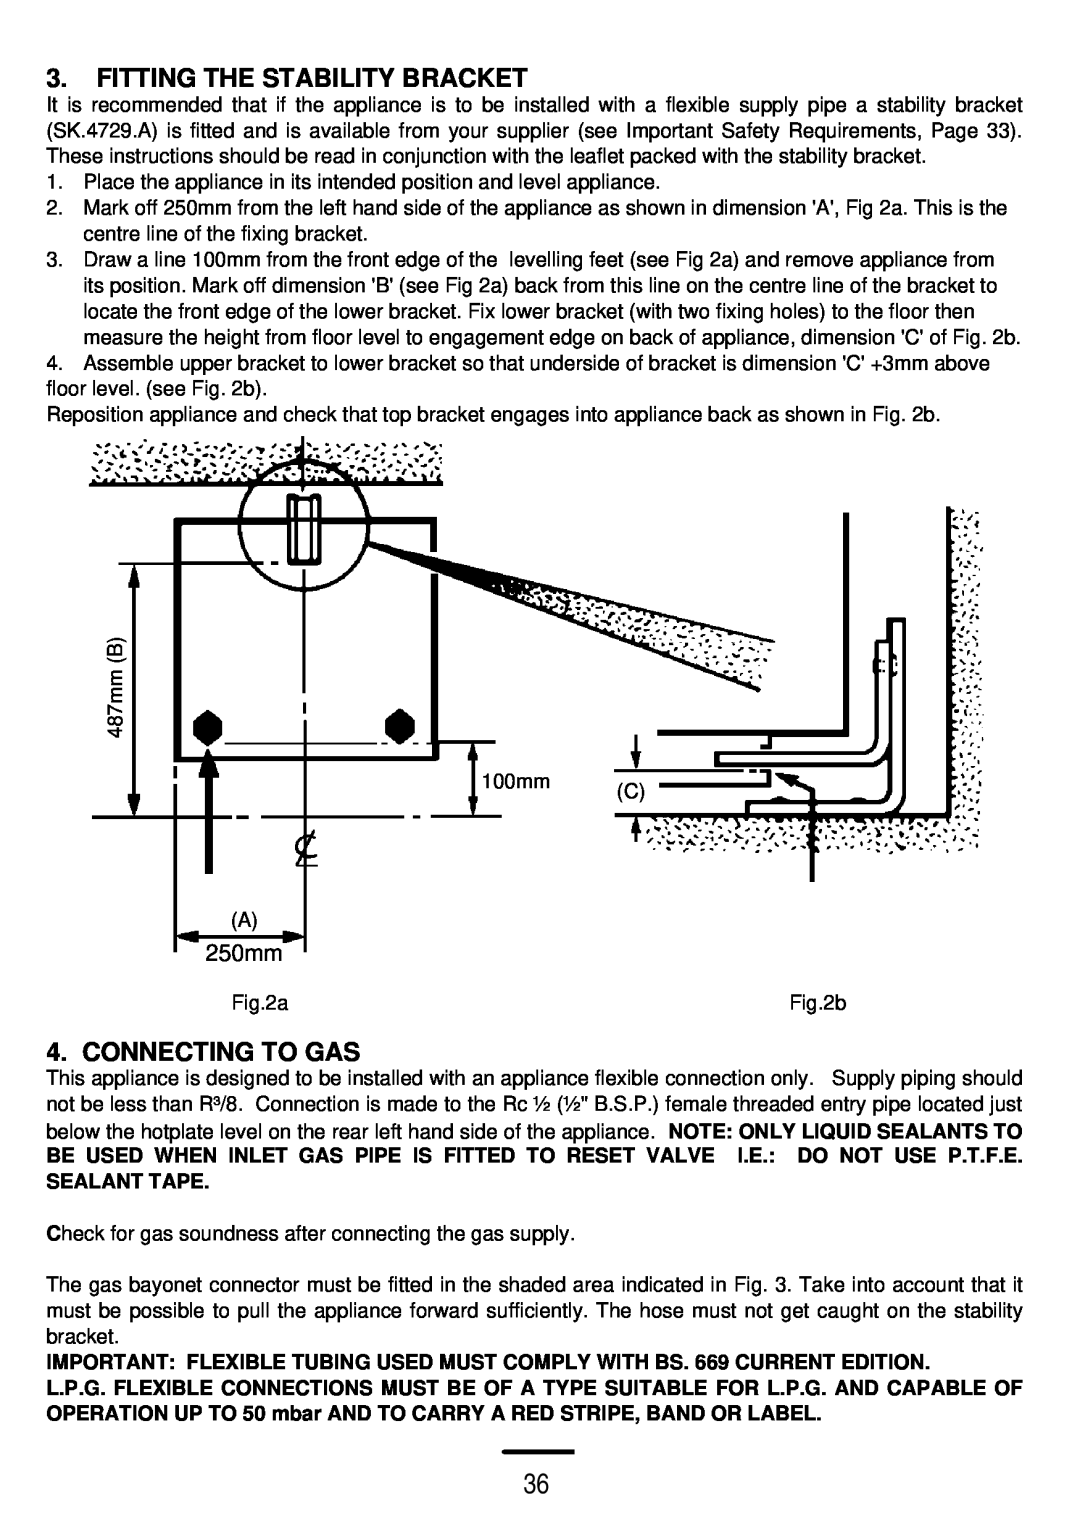 Electrolux 5 0 G L installation instructions Fitting The Stability Bracket, Connecting To Gas, 250mm 